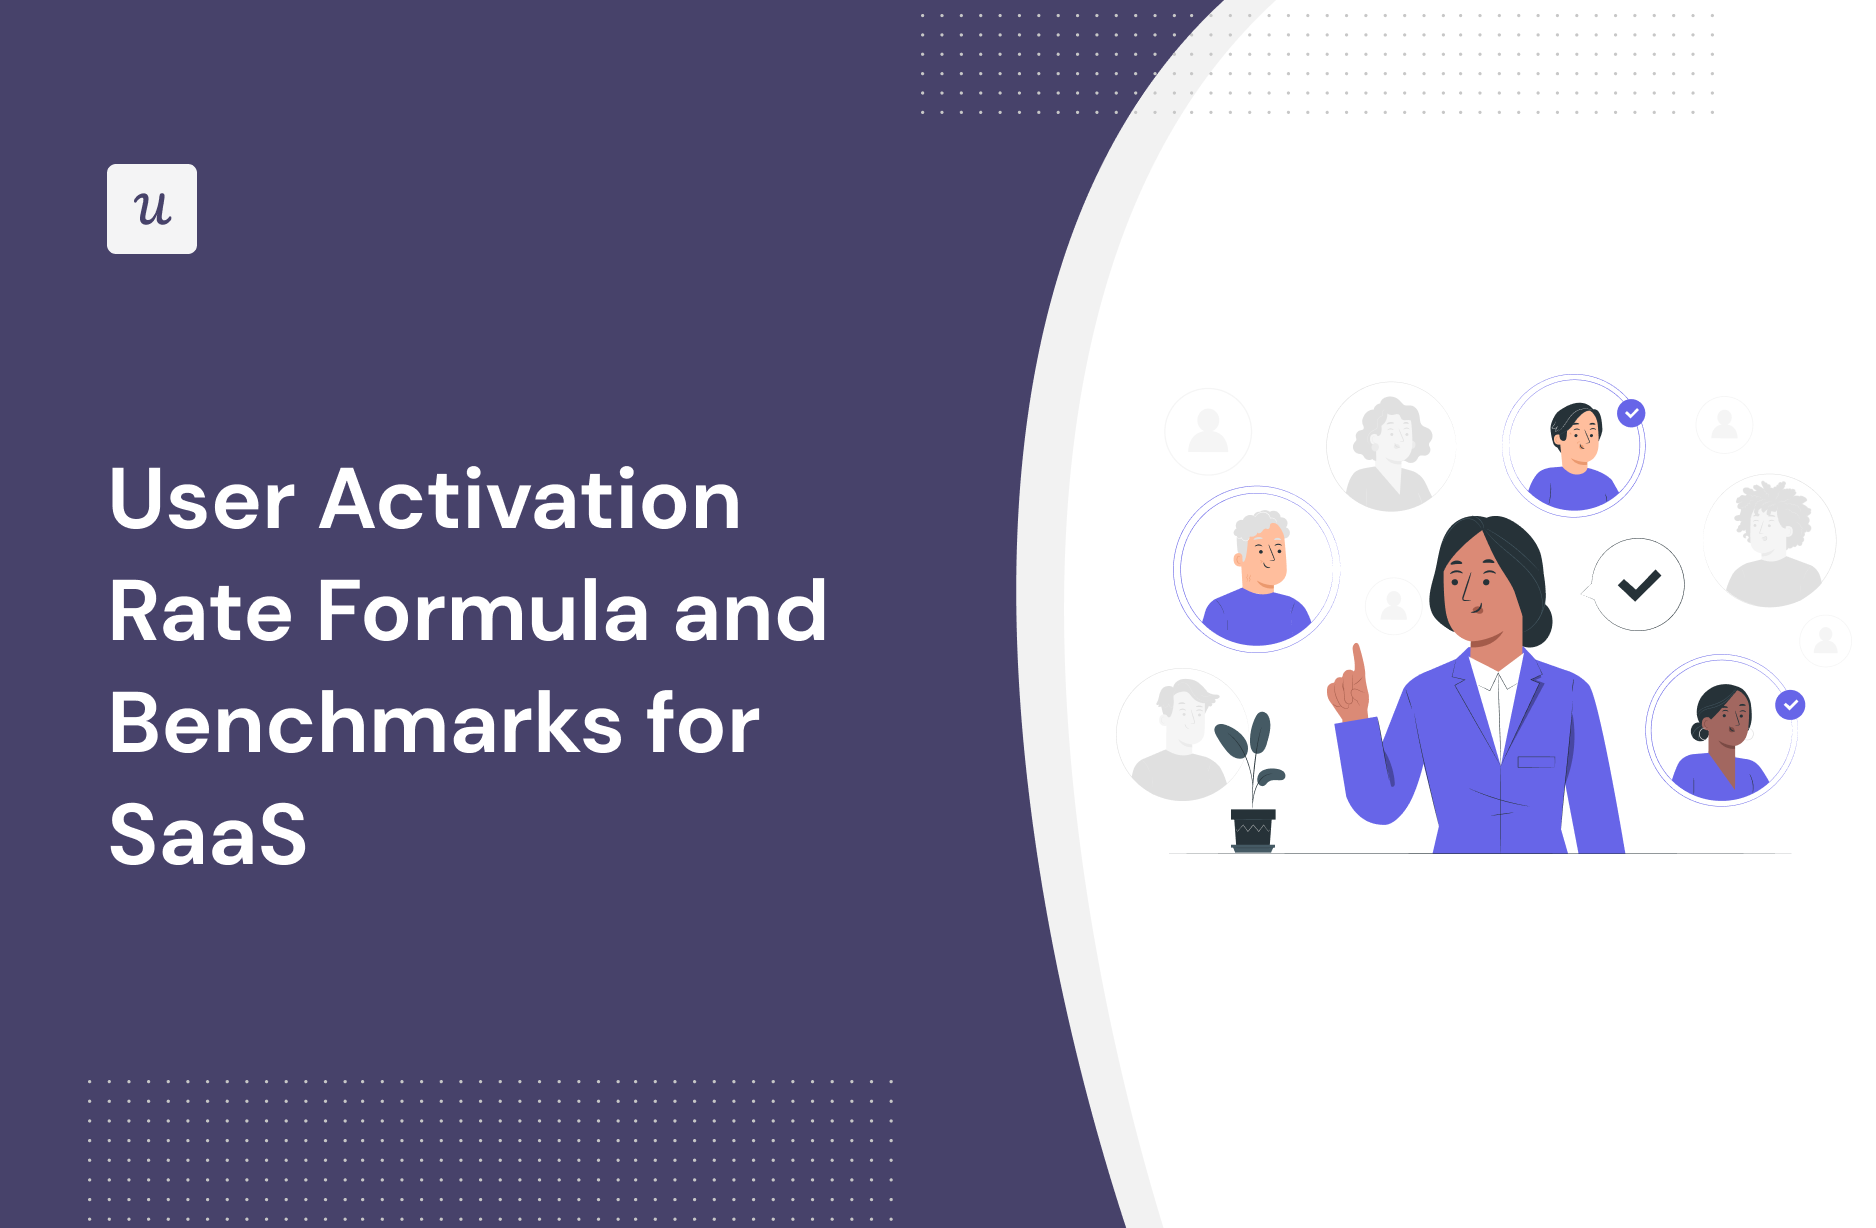 User Activation Rate Formula and Benchmarks for SaaS